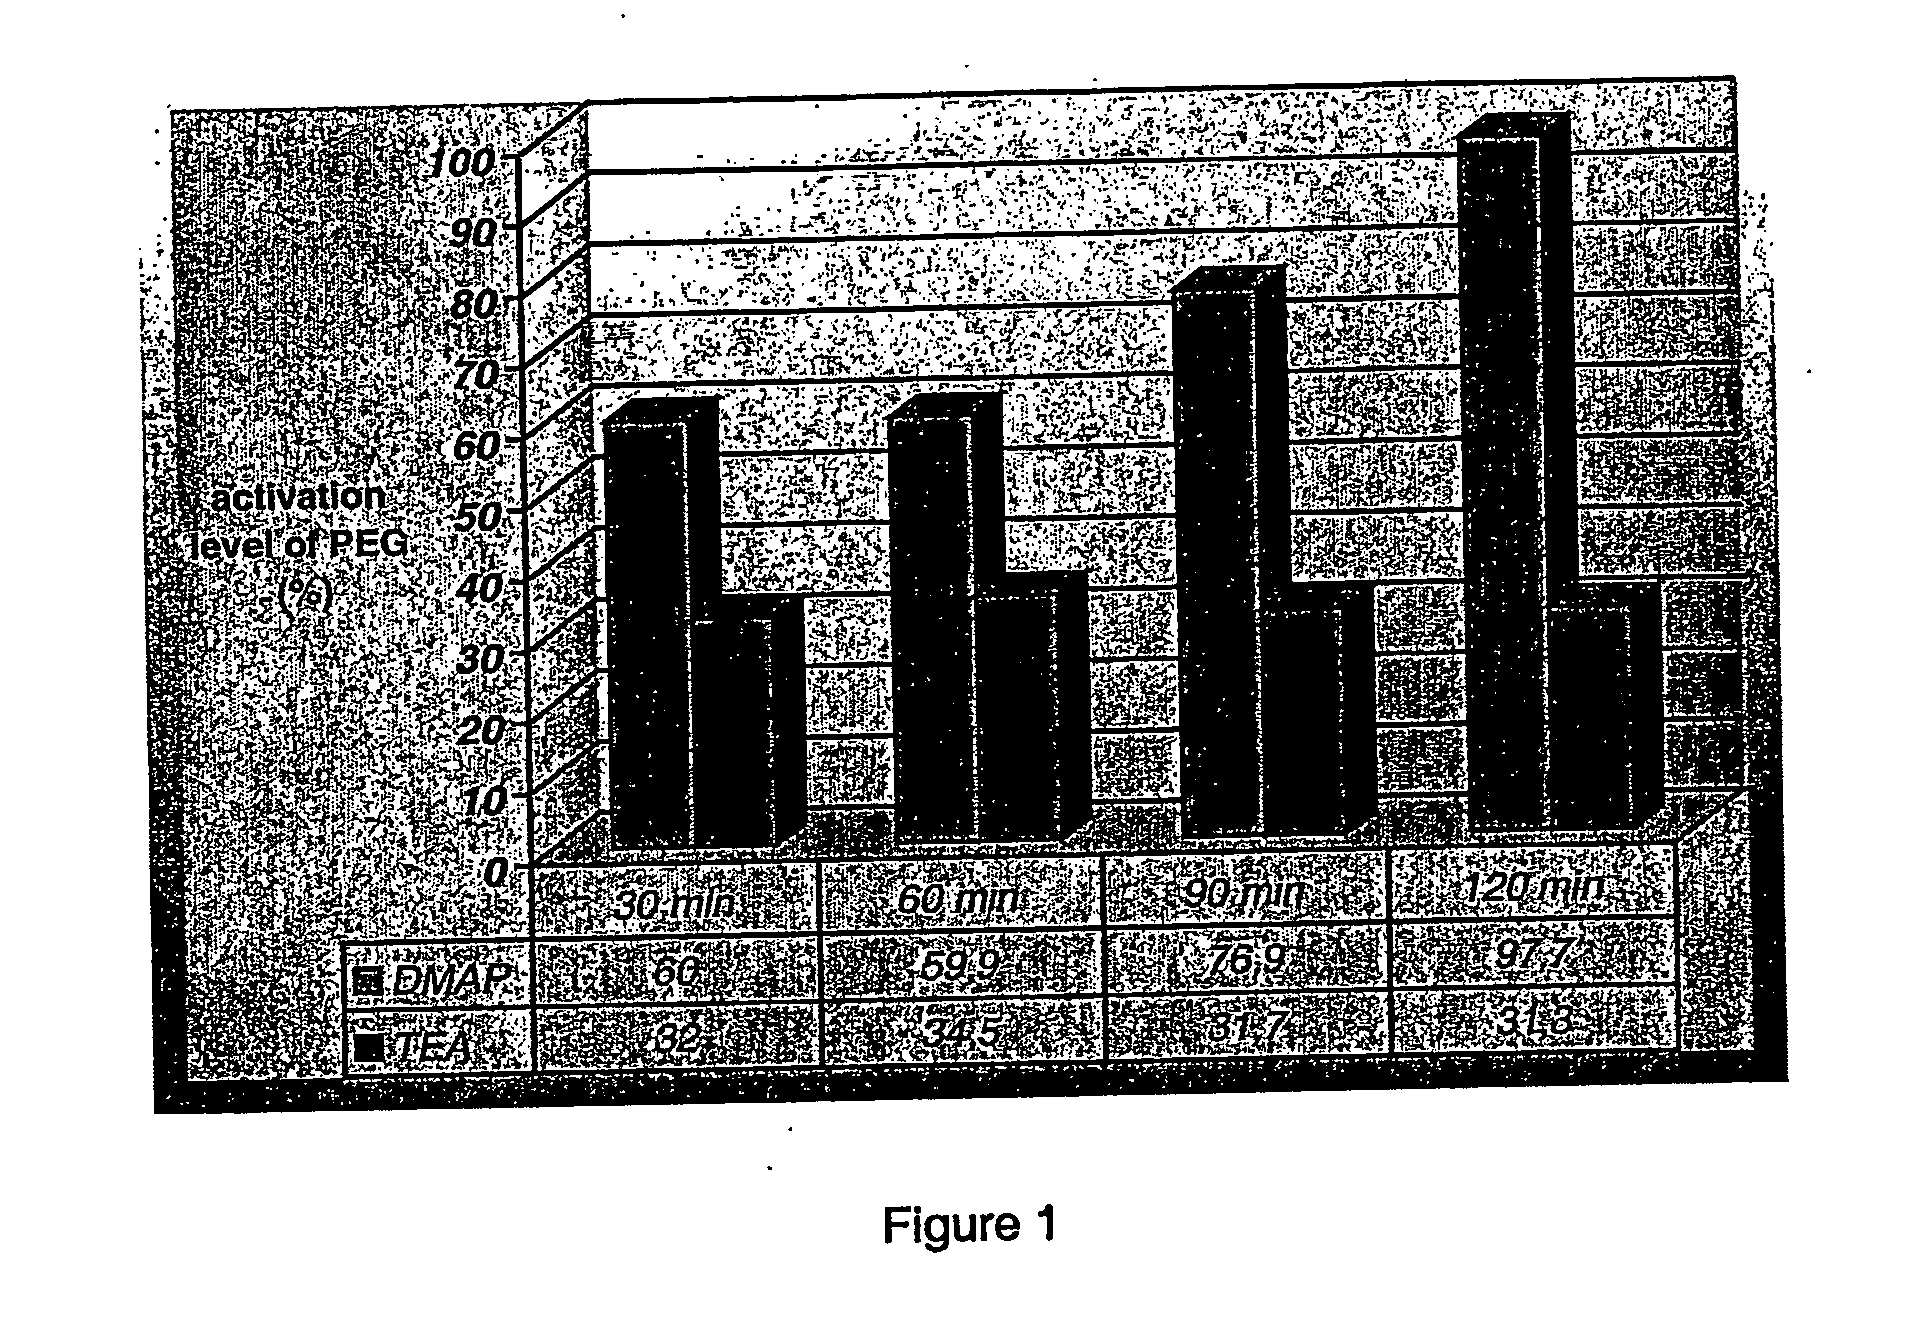 Process for the preparation of activated polyethylene glycols